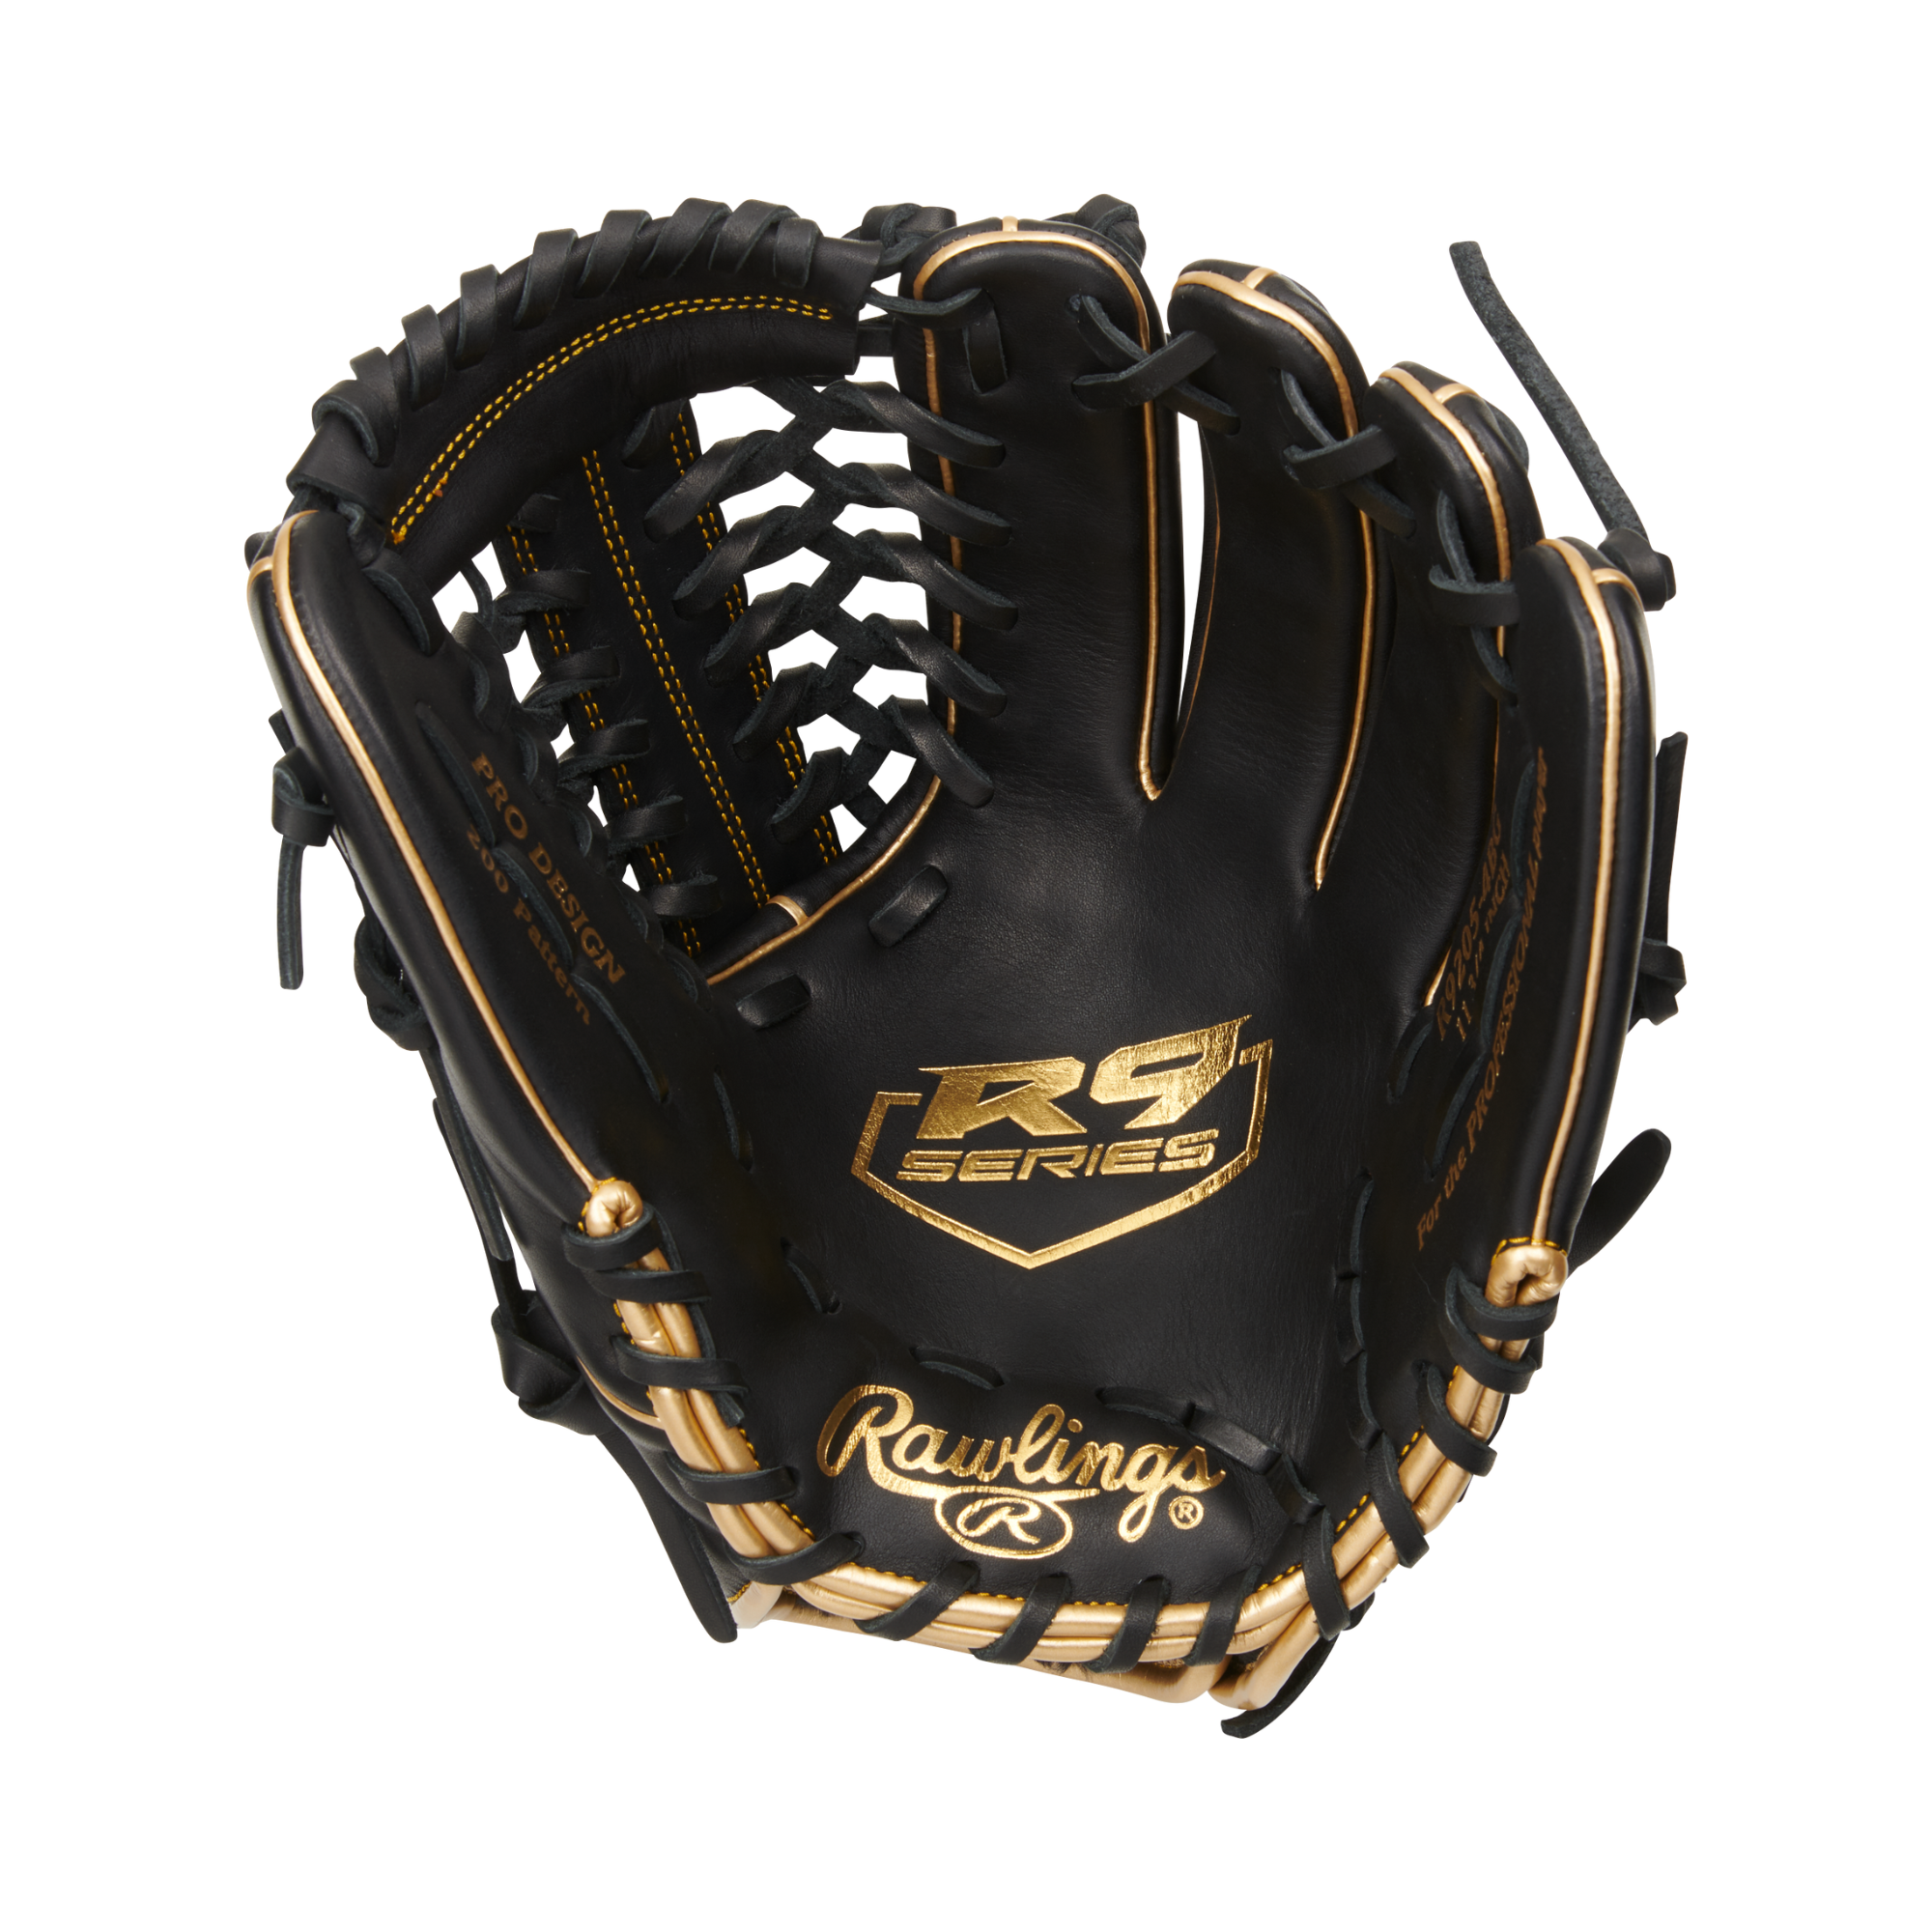 Rawlings R9 11.75 in Glove - Throwing Hand:Right